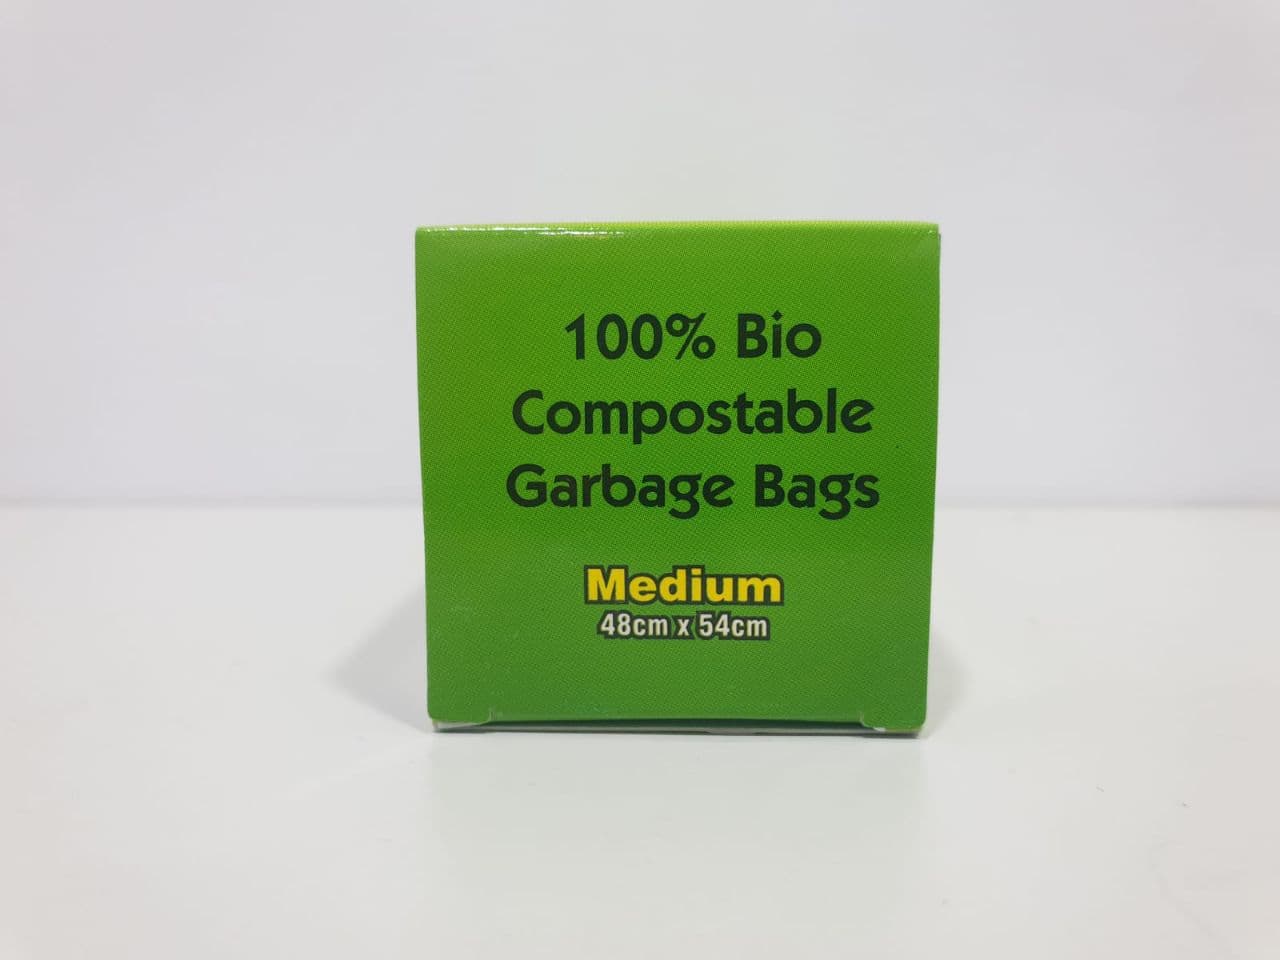 Biodegradable shopping bags
carry bag